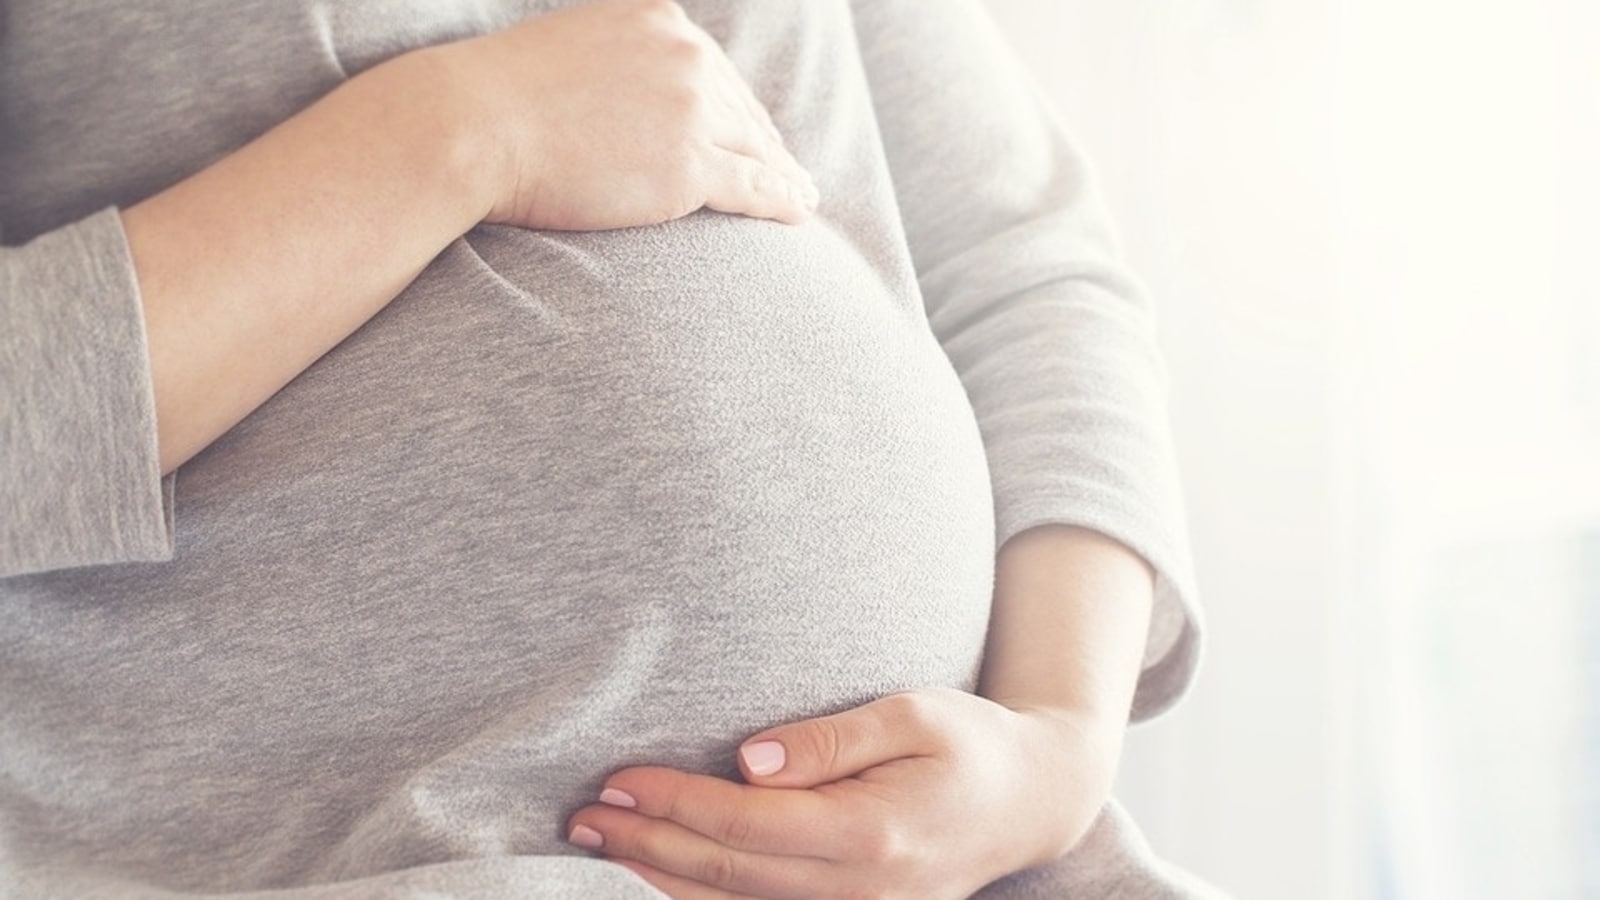 Obesity in pregnancy may impair heart health and function in foetus, says study